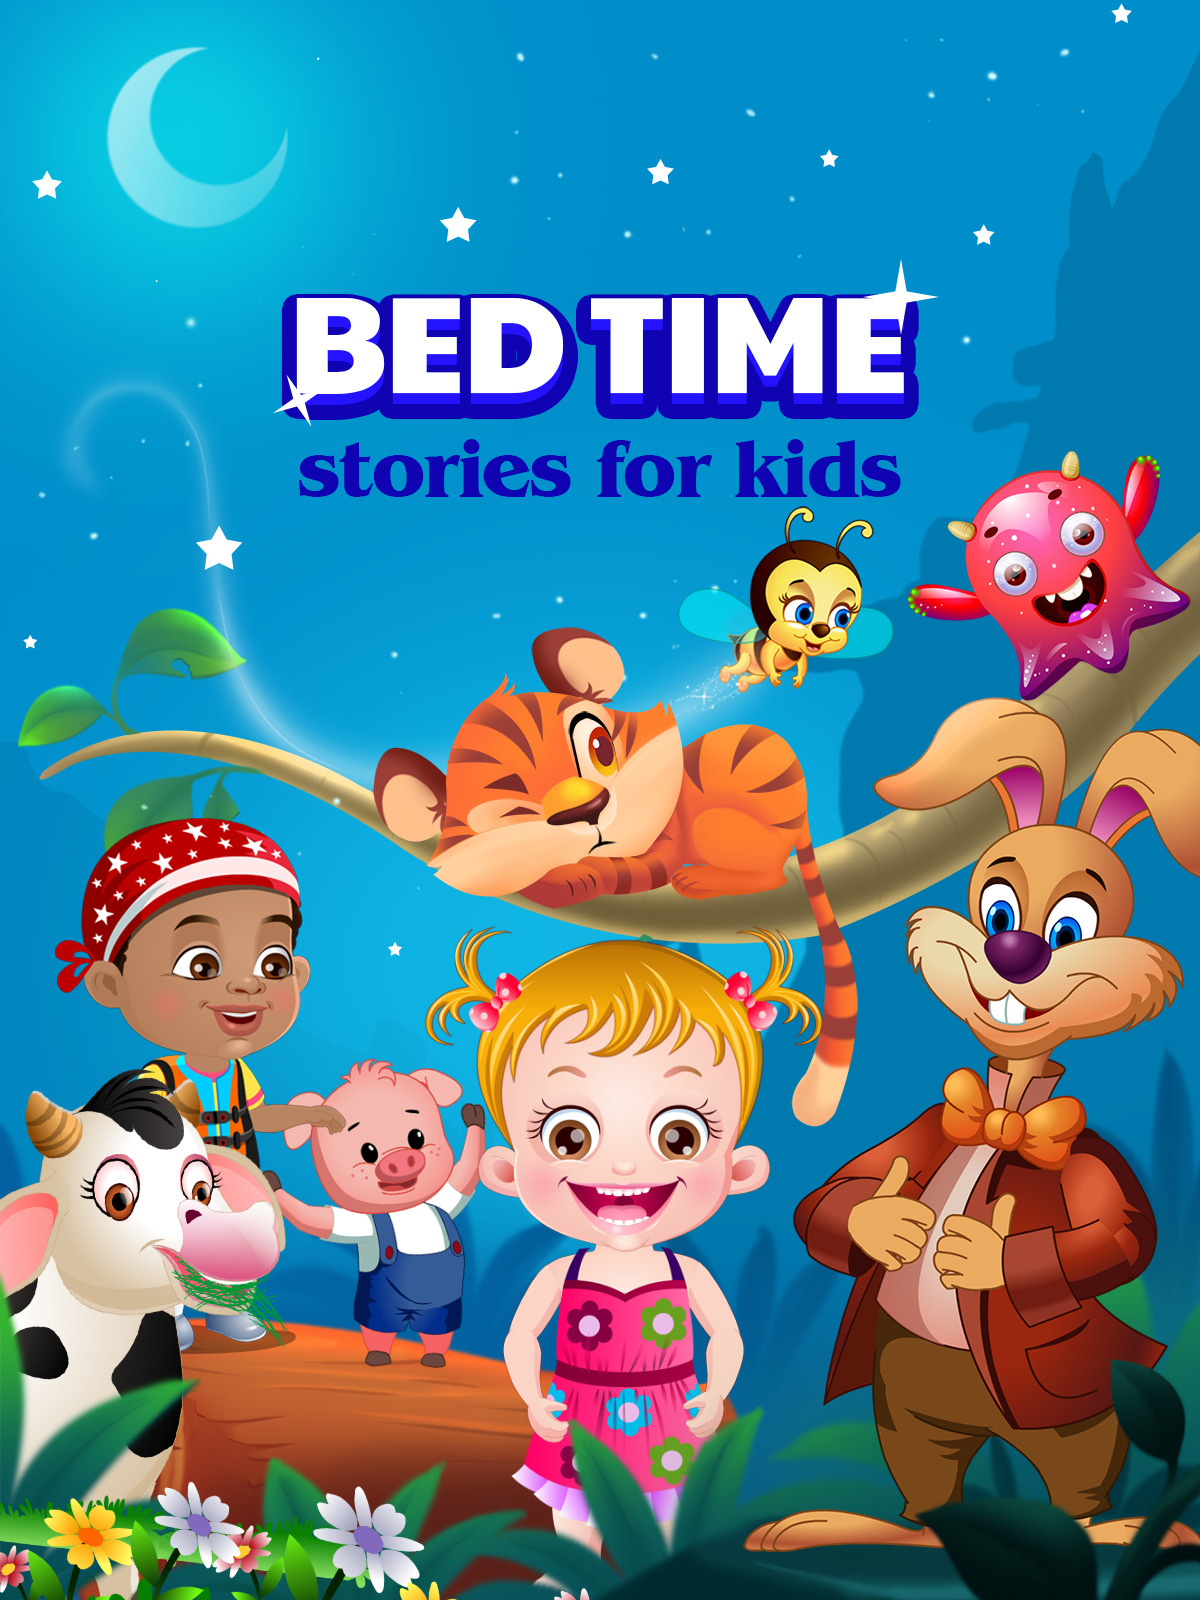 adedayo taiwo recommends bedtime stories watch online pic